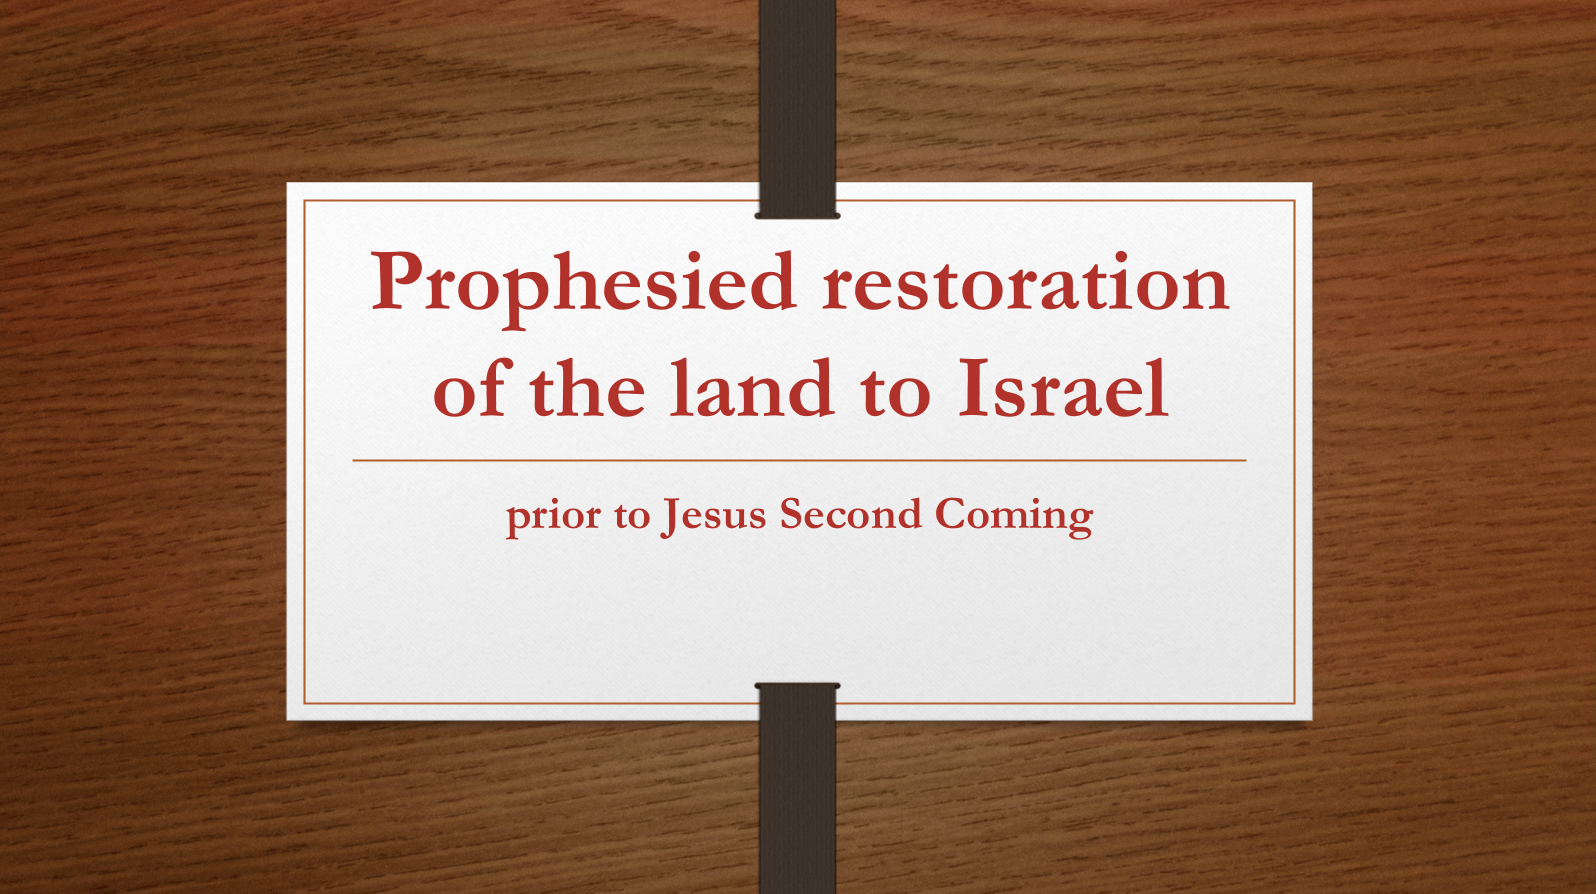 PPS - Prophesied restoration of the land of Israel